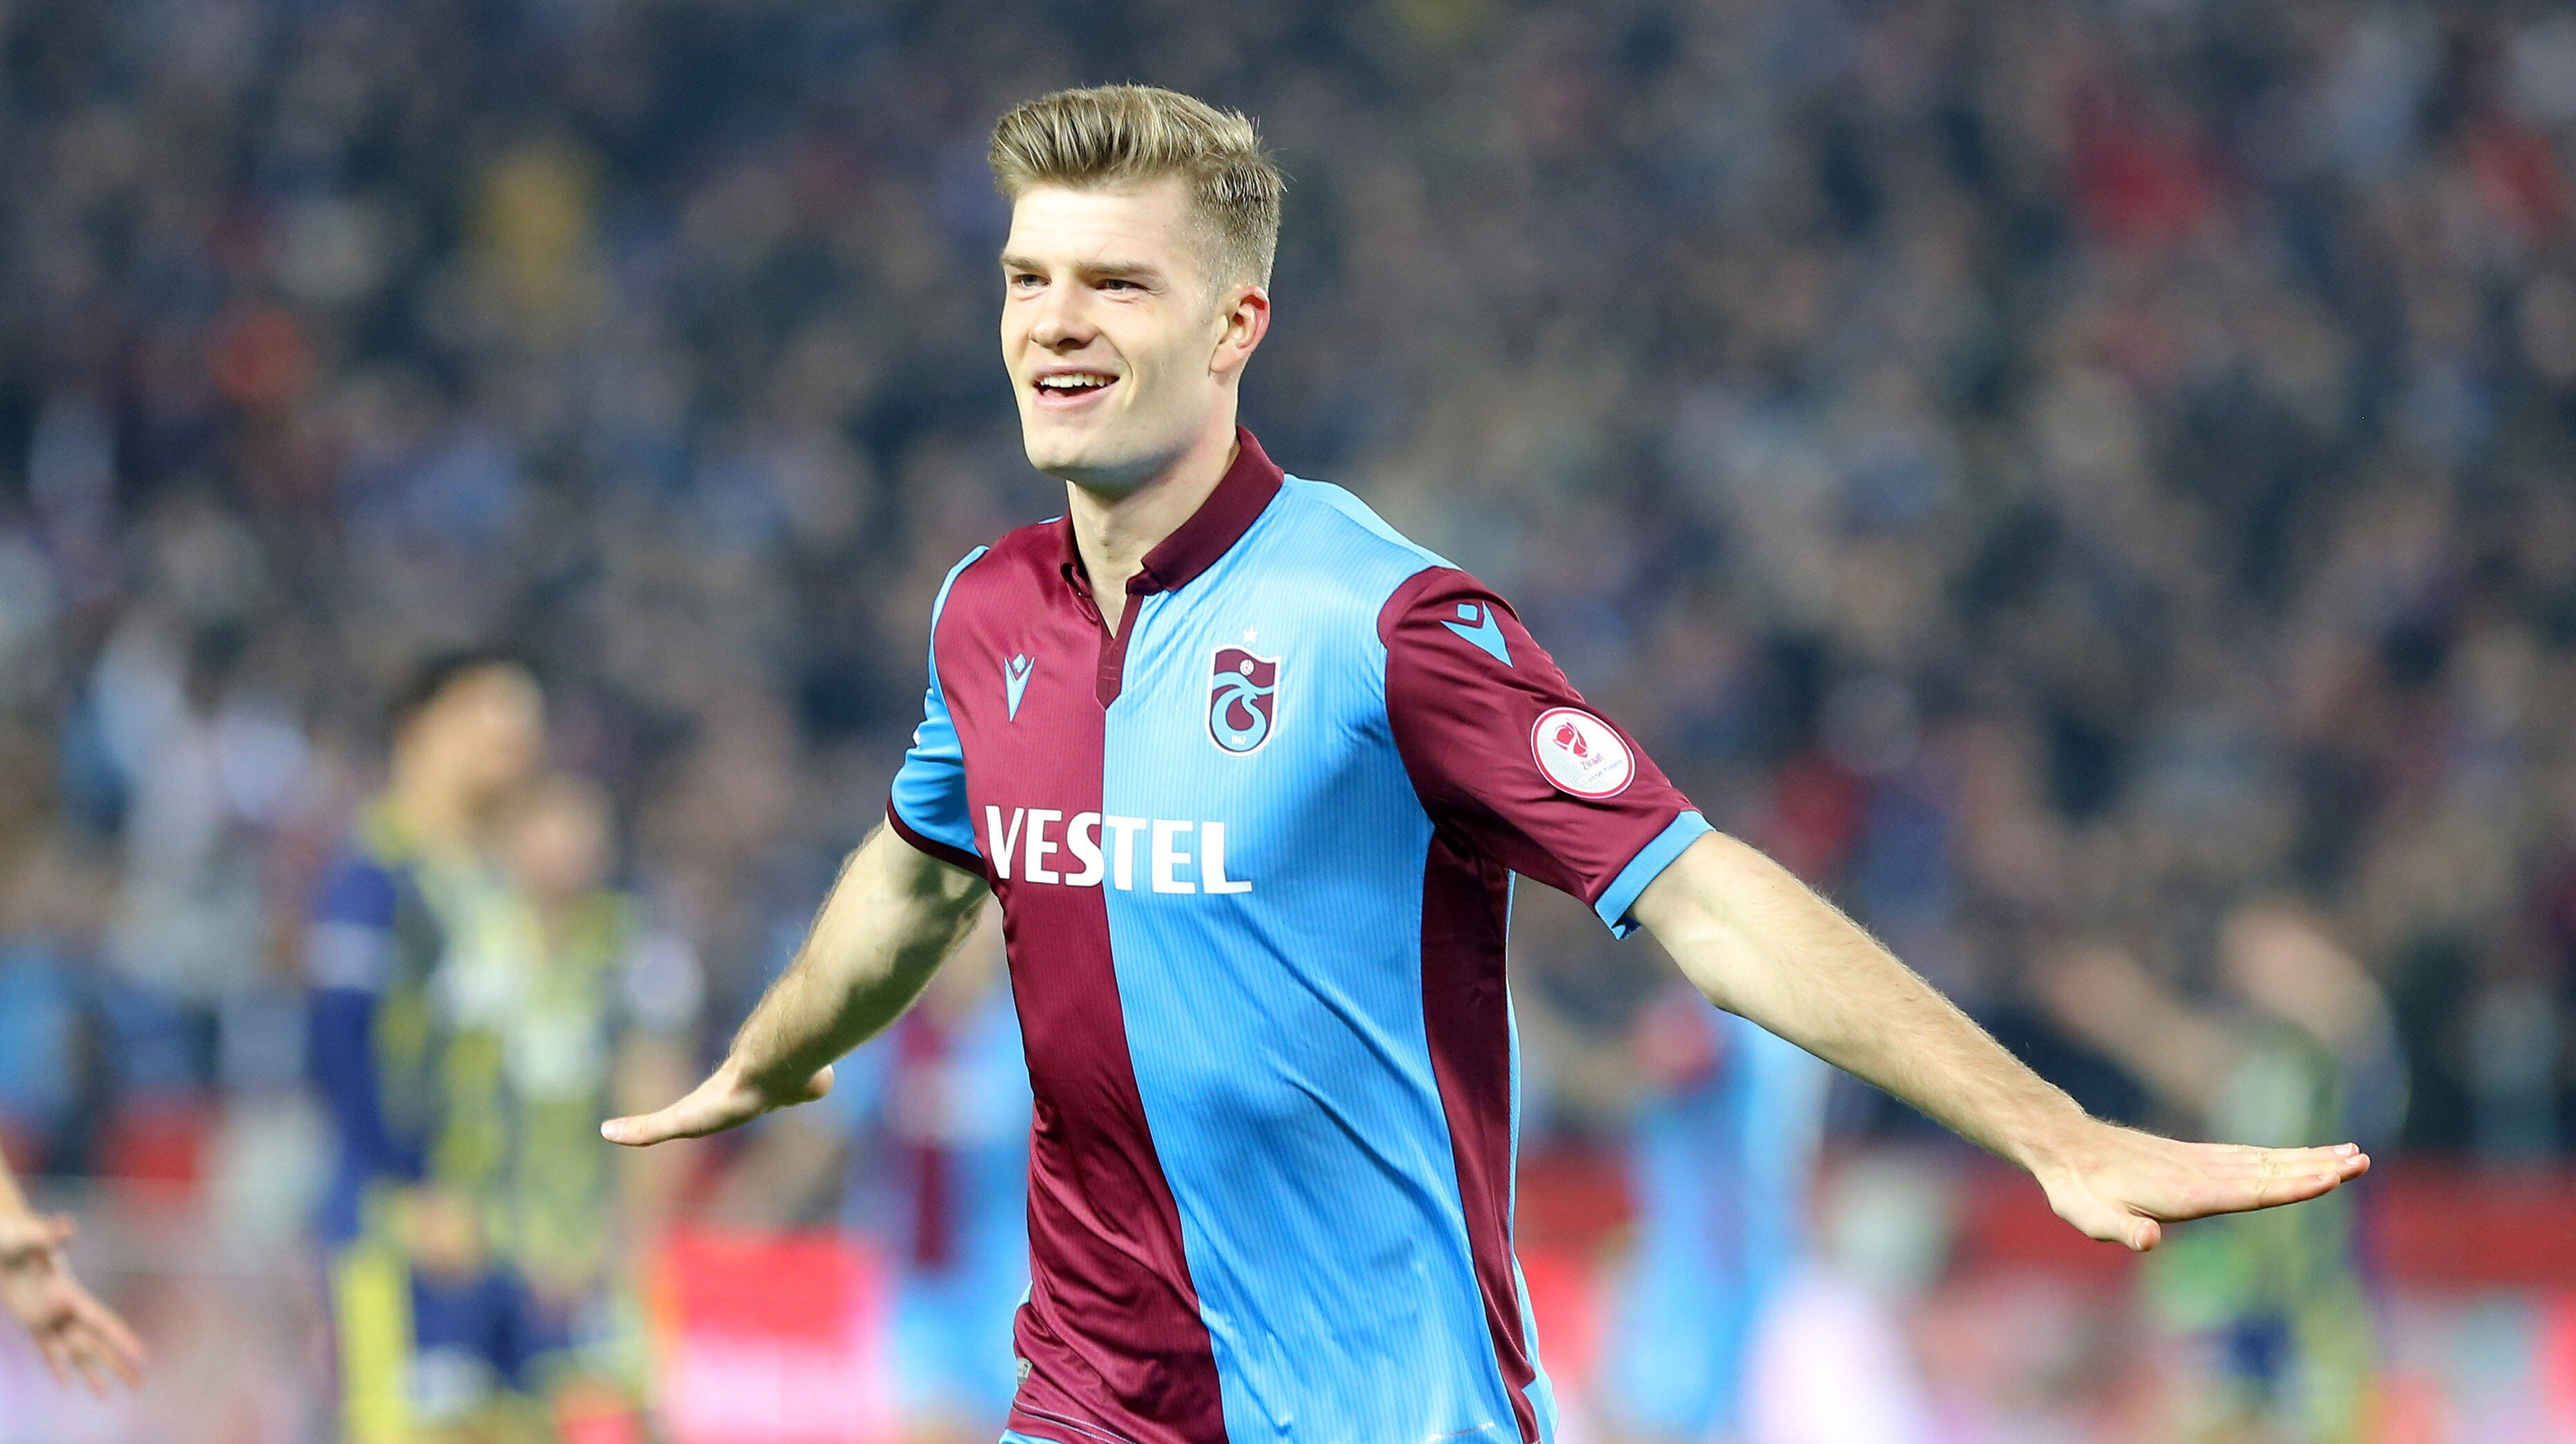 Sørloth joins RB Leipzig Palace and Trabzonspor split fee